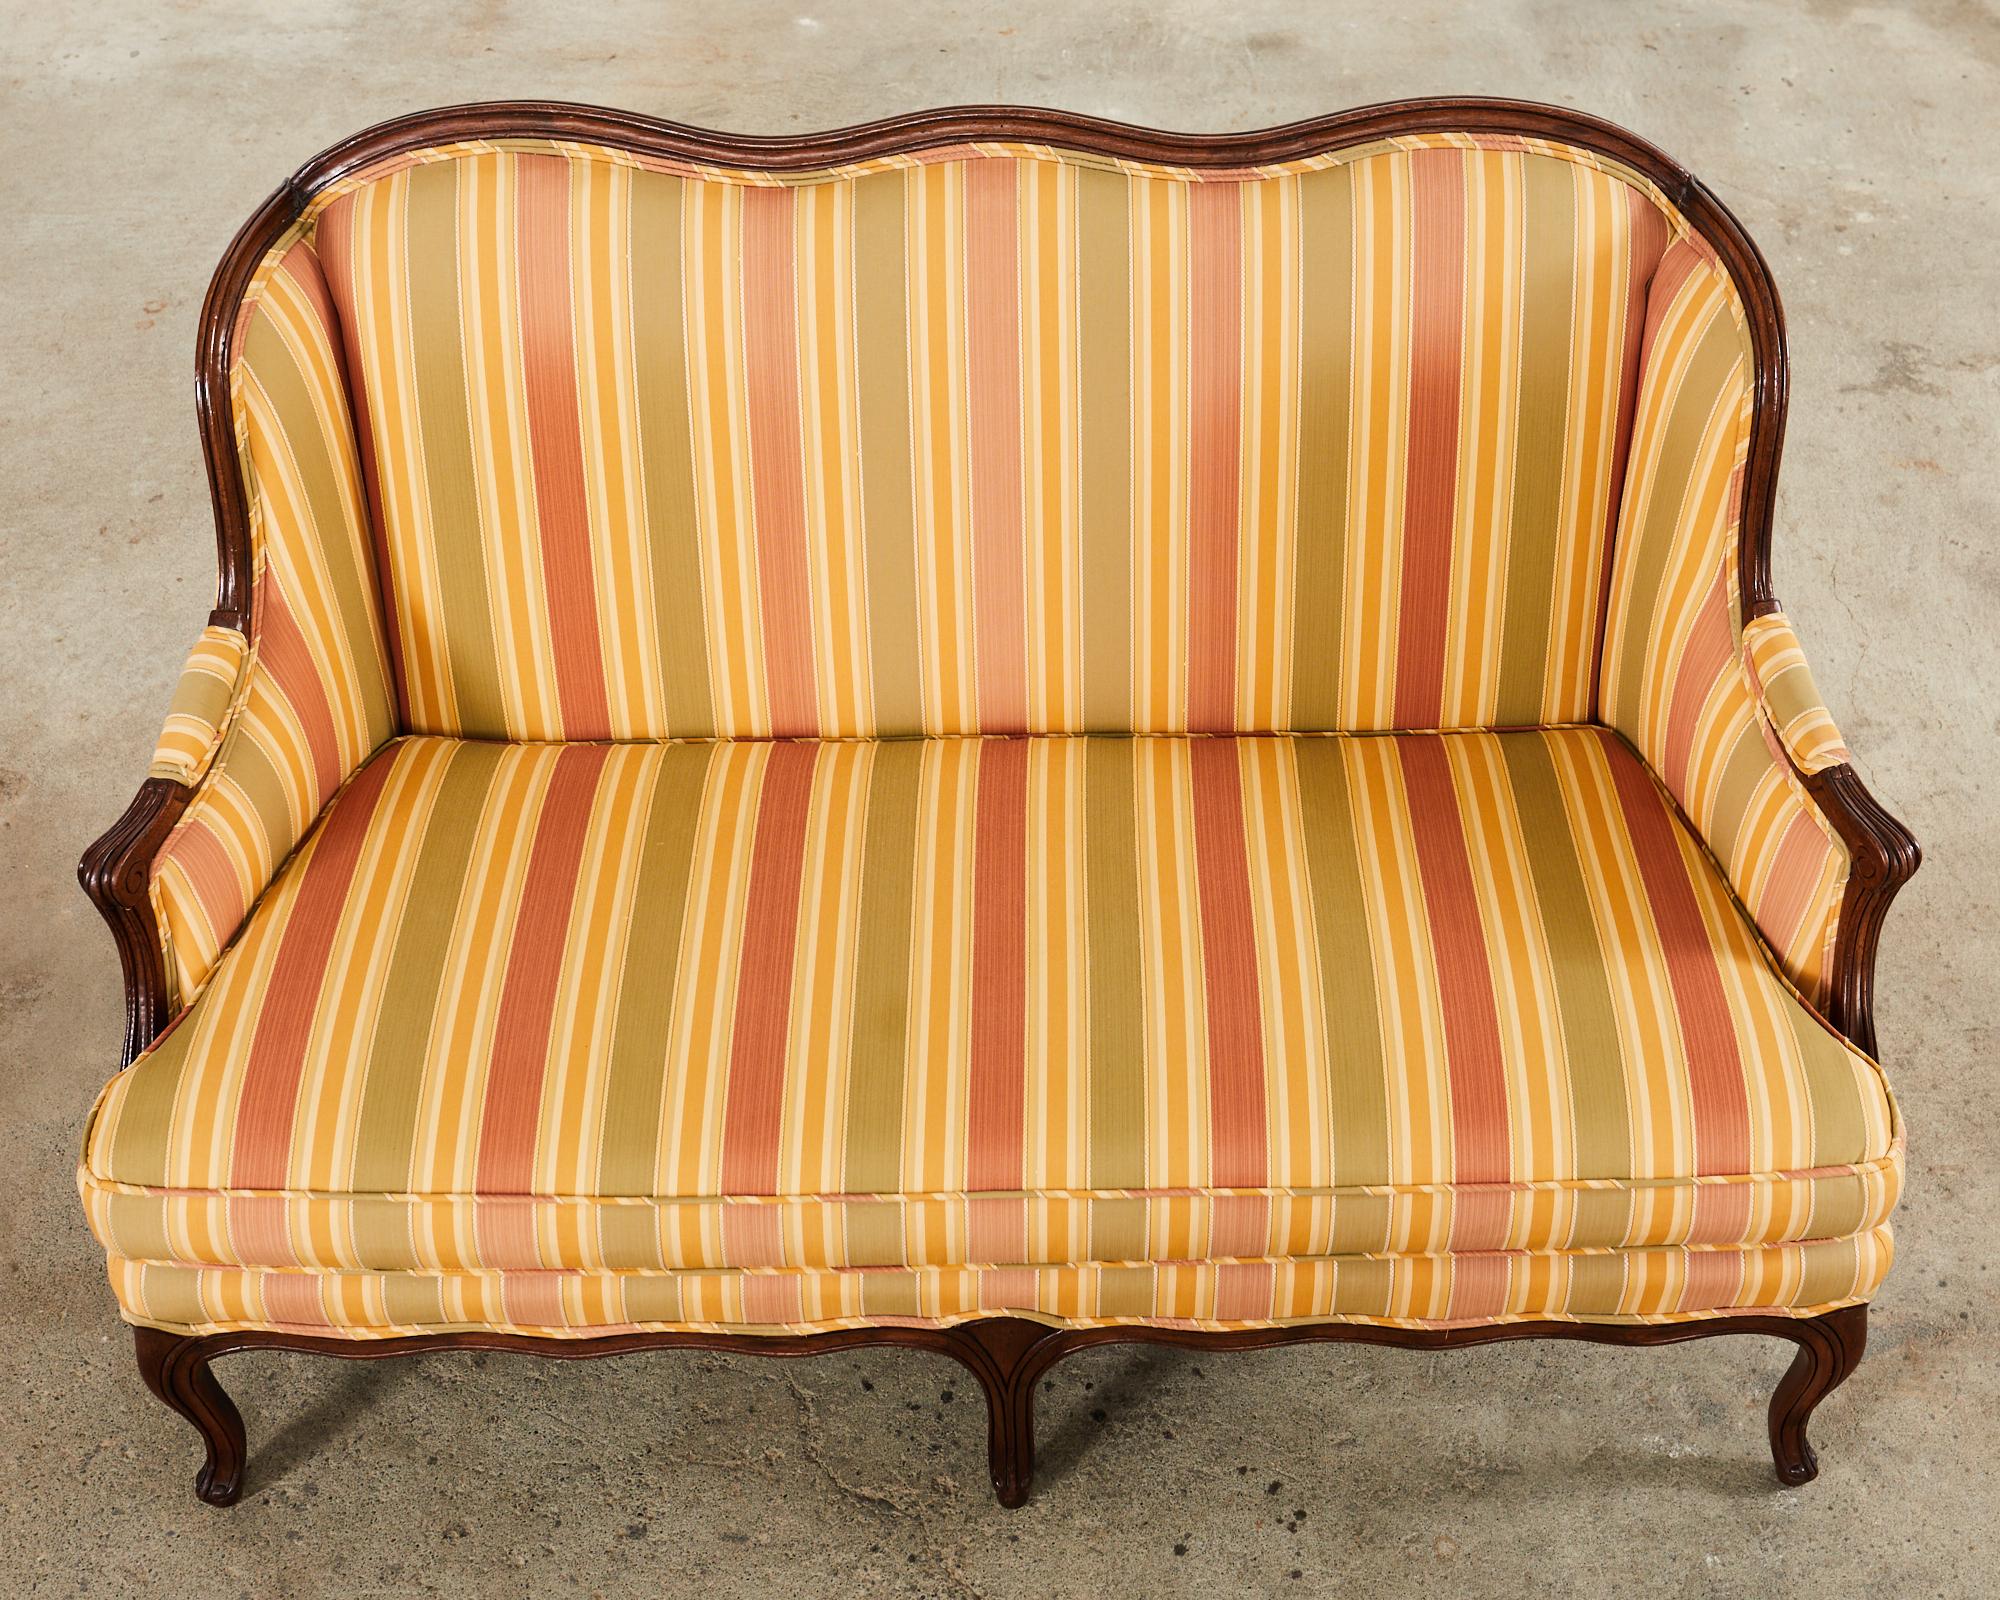 Country French Provincial Louis XV Style Serpentine Wingback Settee In Good Condition For Sale In Rio Vista, CA